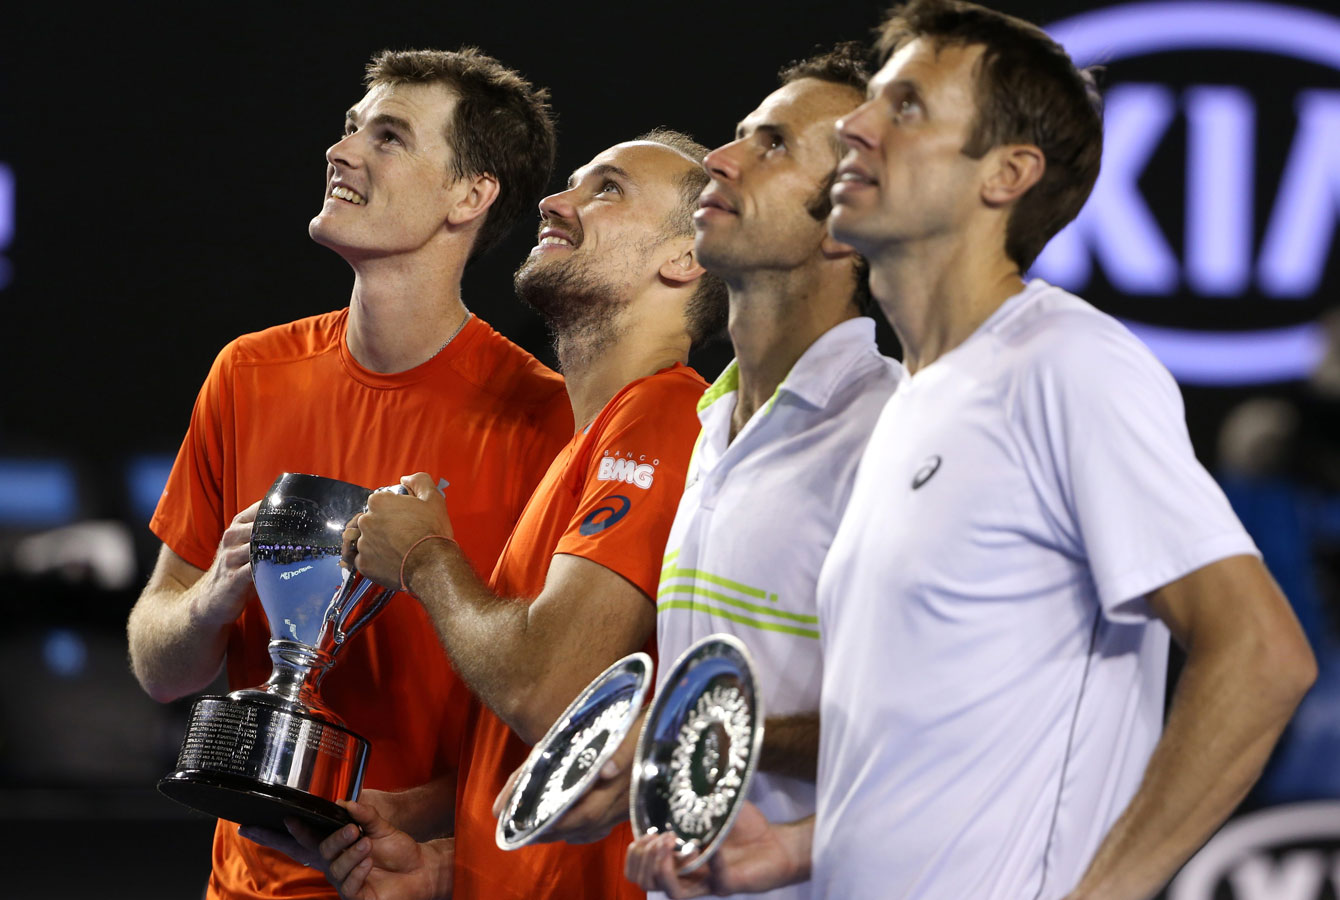 Daniel Nestor (right) holds the runner-up plate at the Australian Open after the men's doubles final on January 30, 2016. 